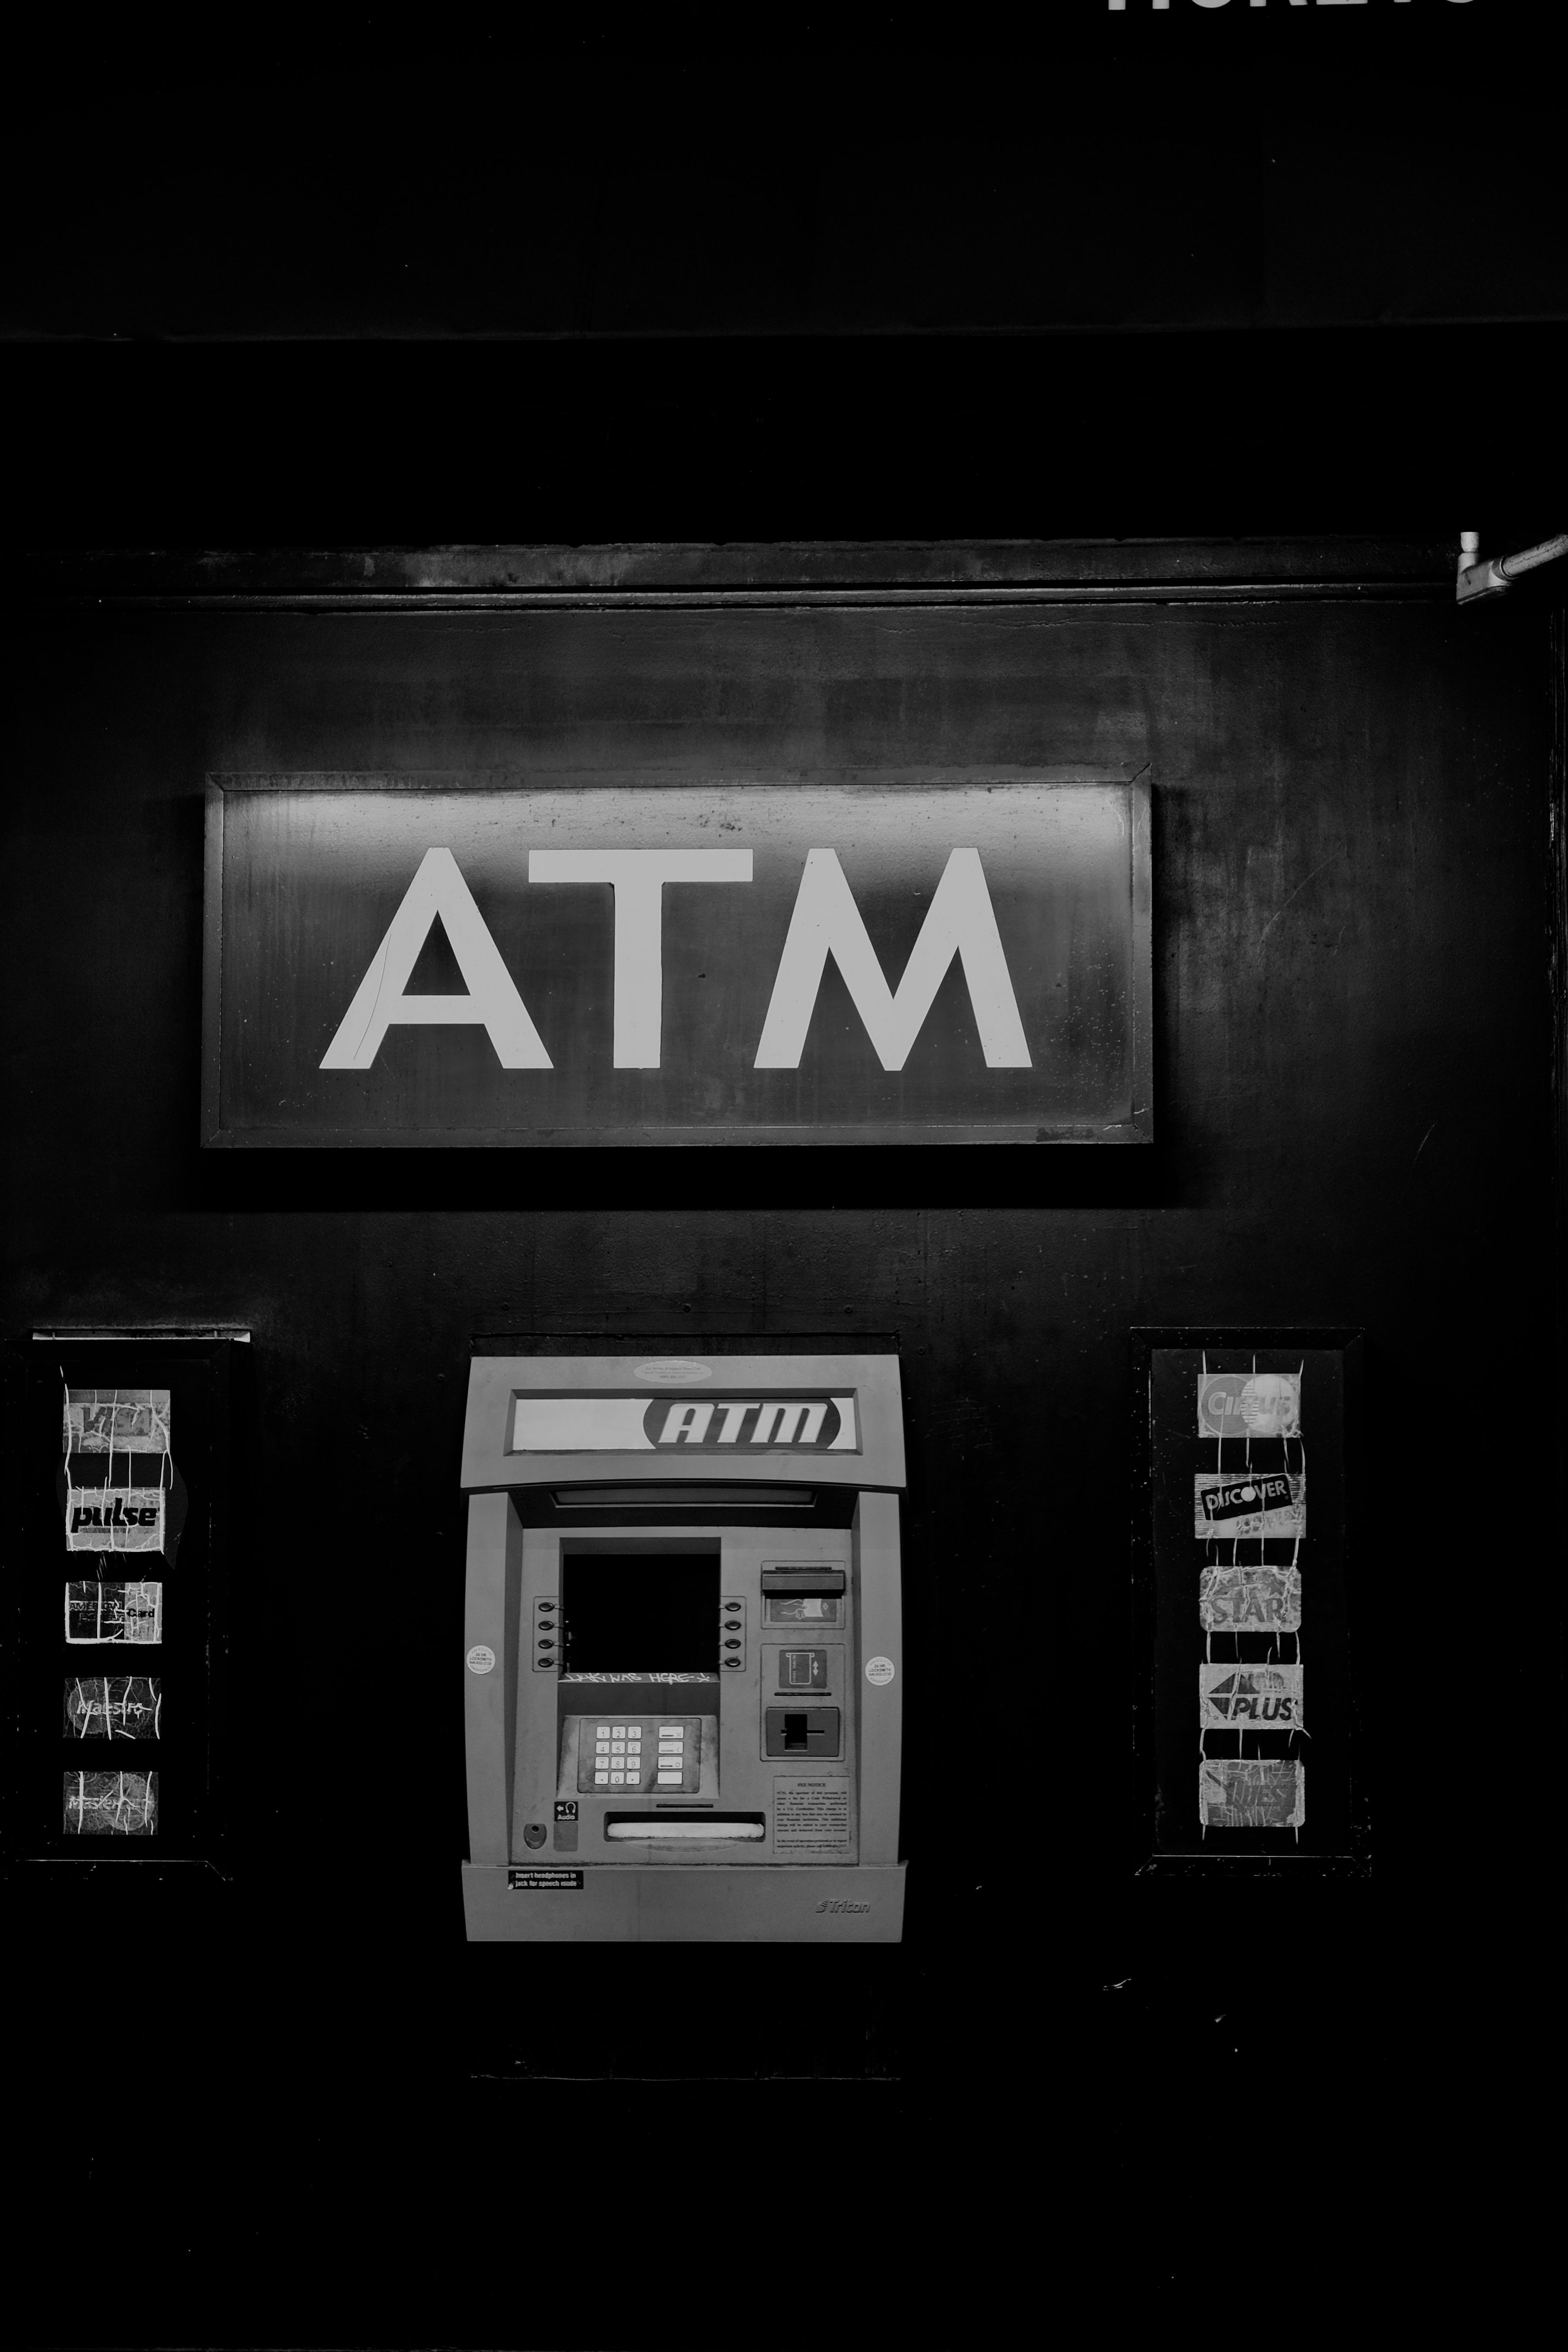 Destroying ATMs for 'Too Much Cash' and Other Strange Stories